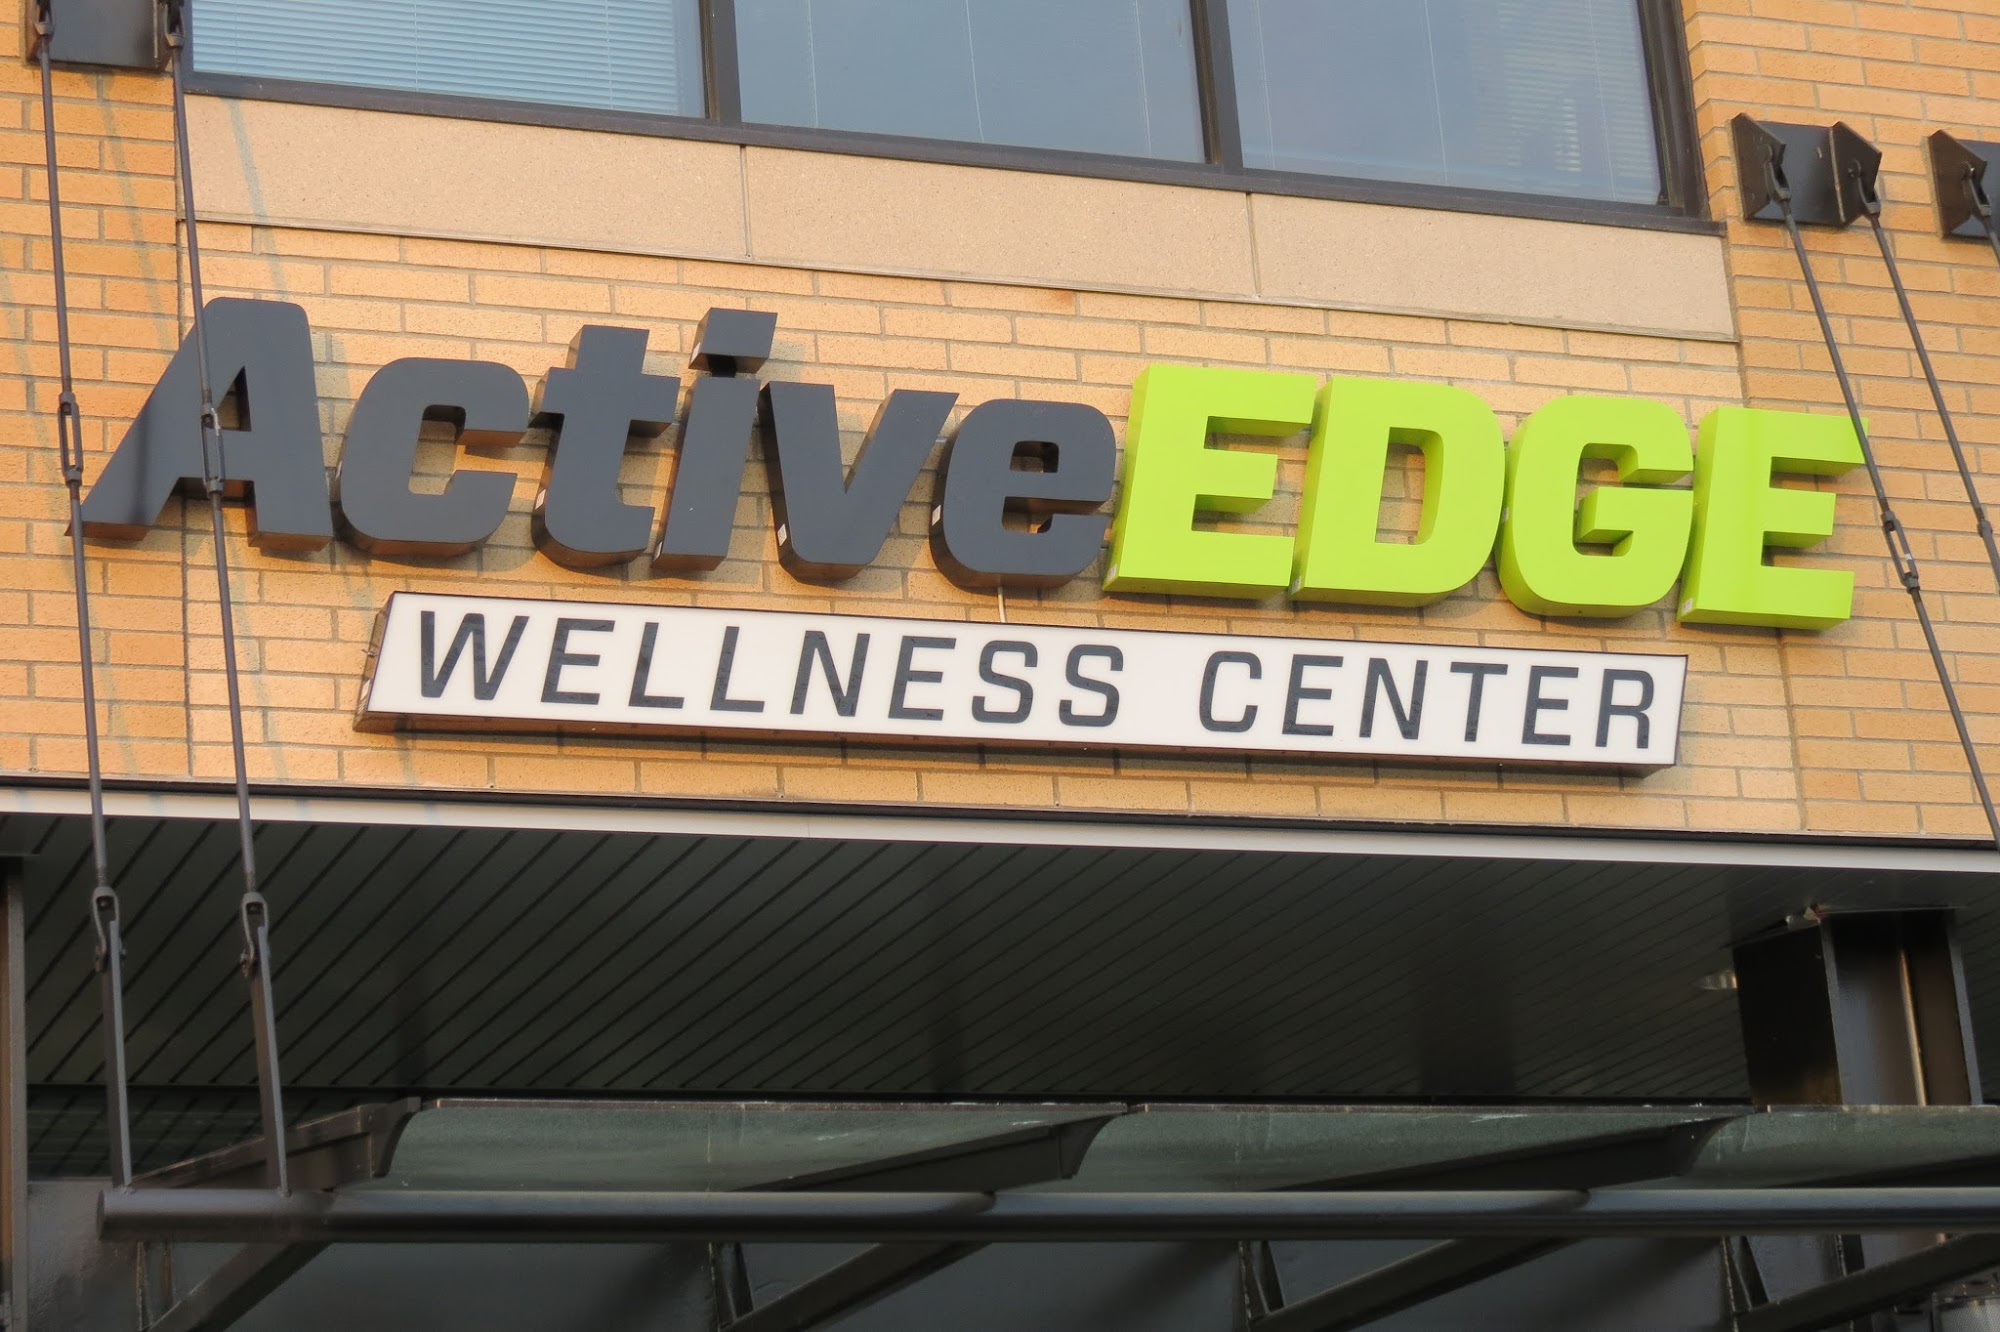 Active Edge Physical Therapy & Gym